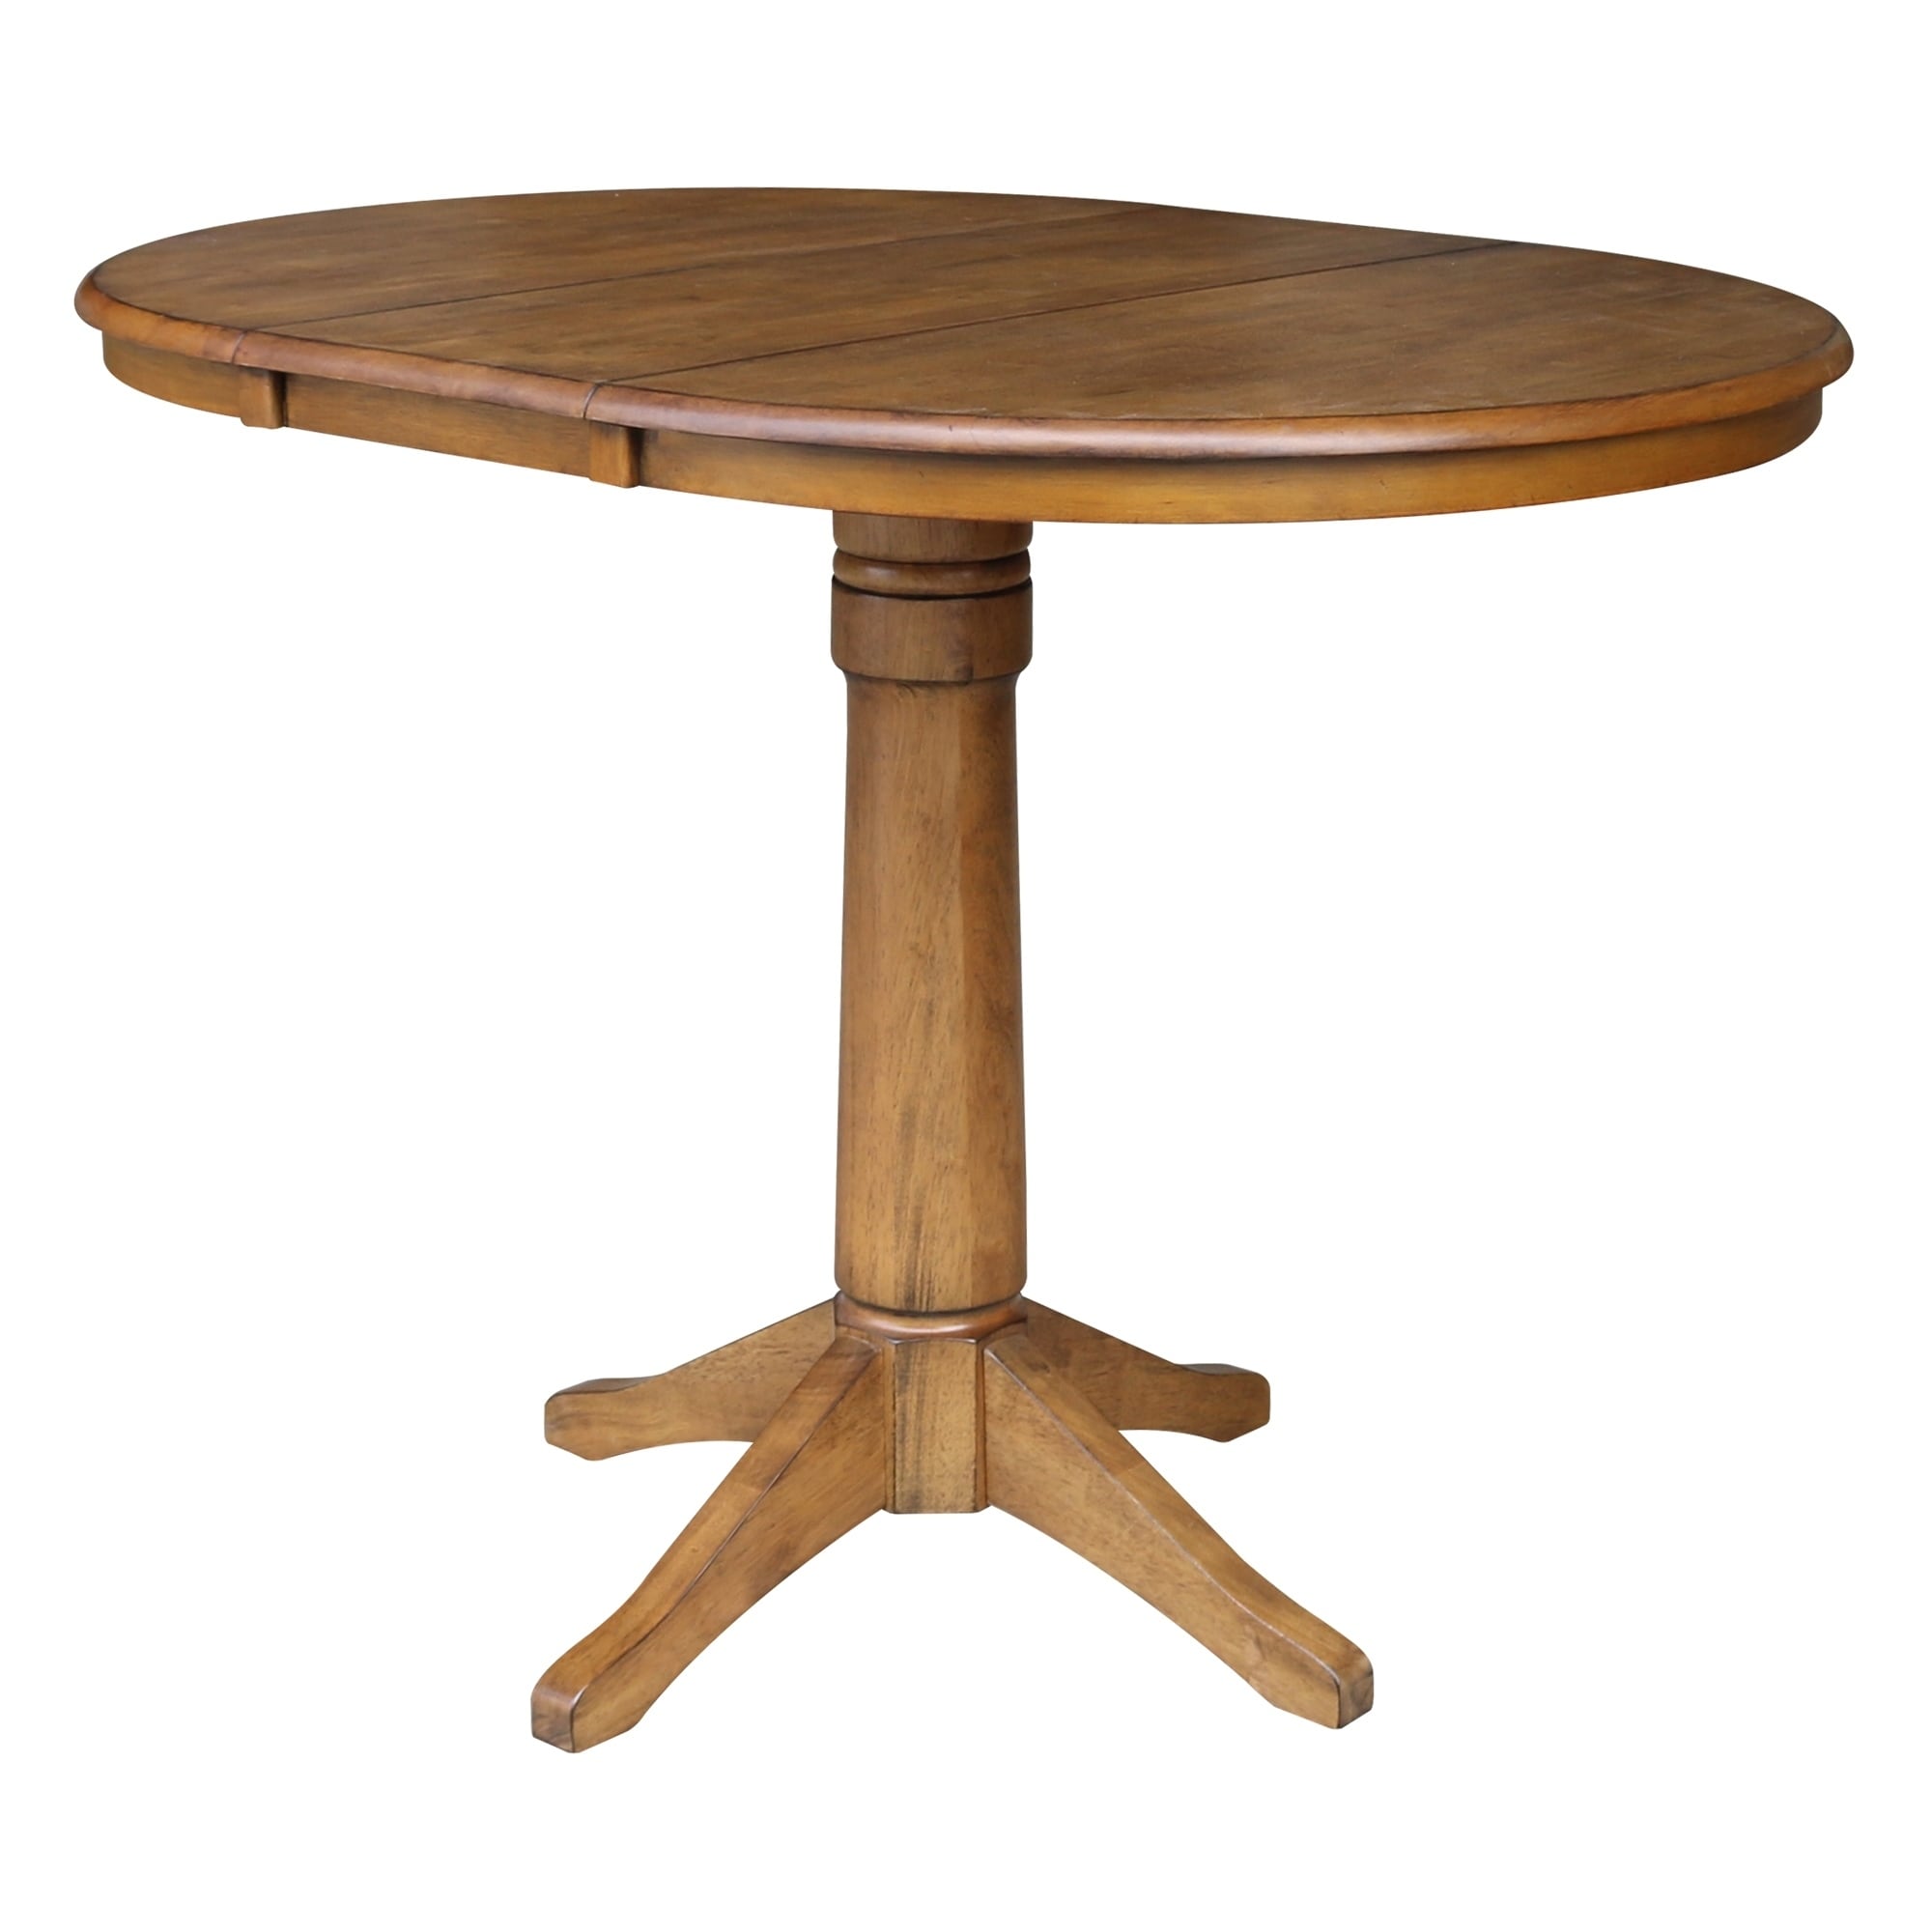 36 Round Pedestal Dining Table With 12 Leaf Pecan Overstock 22815520